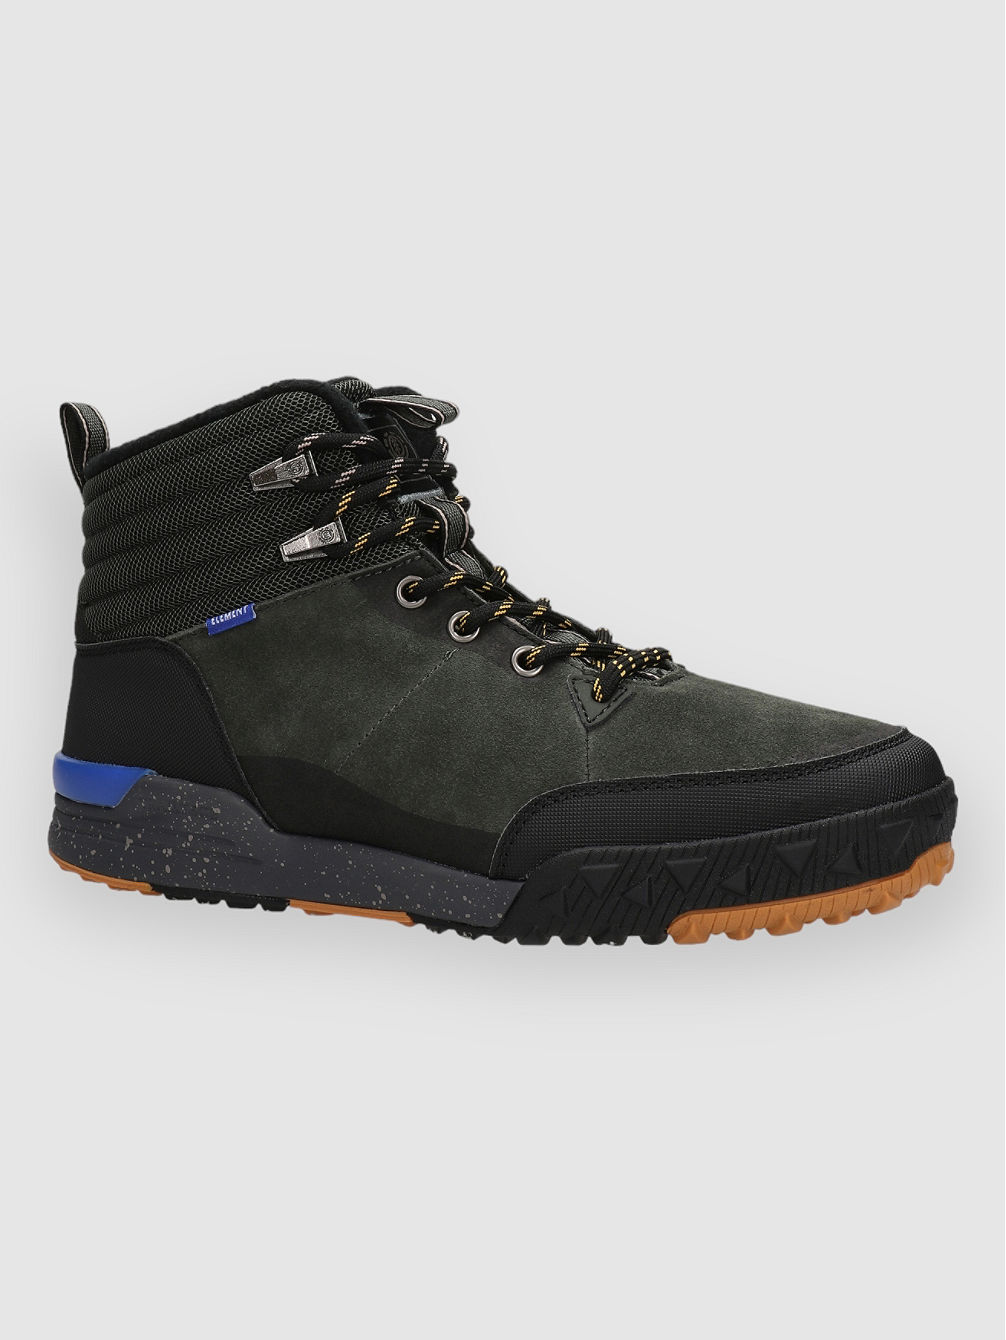 Donnelly Elite Winter Chaussures